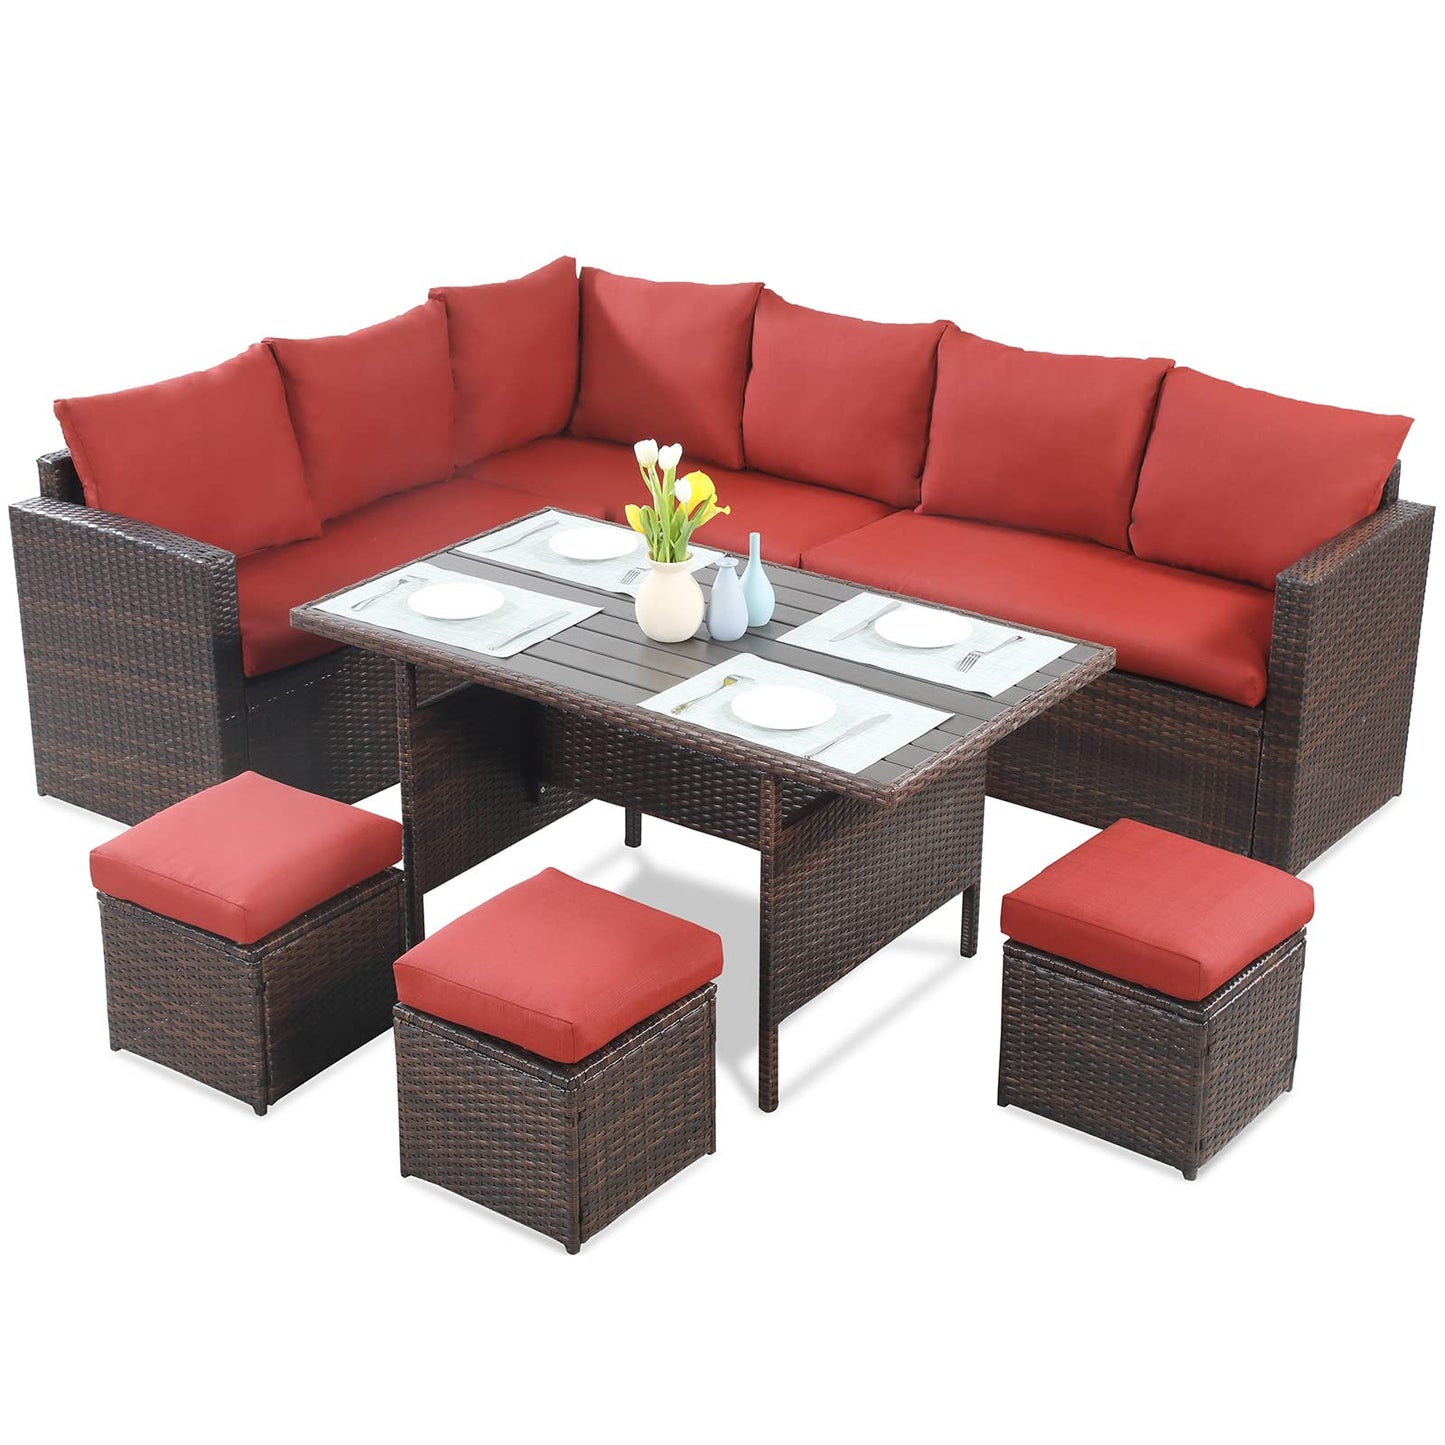 Wisteria Lane Patio Furniture Set, 7 Piece Outdoor Dining Sectional Sofa with Dining Table and Chair, All Weather Wicker Conversation Set with Ottoman, Red